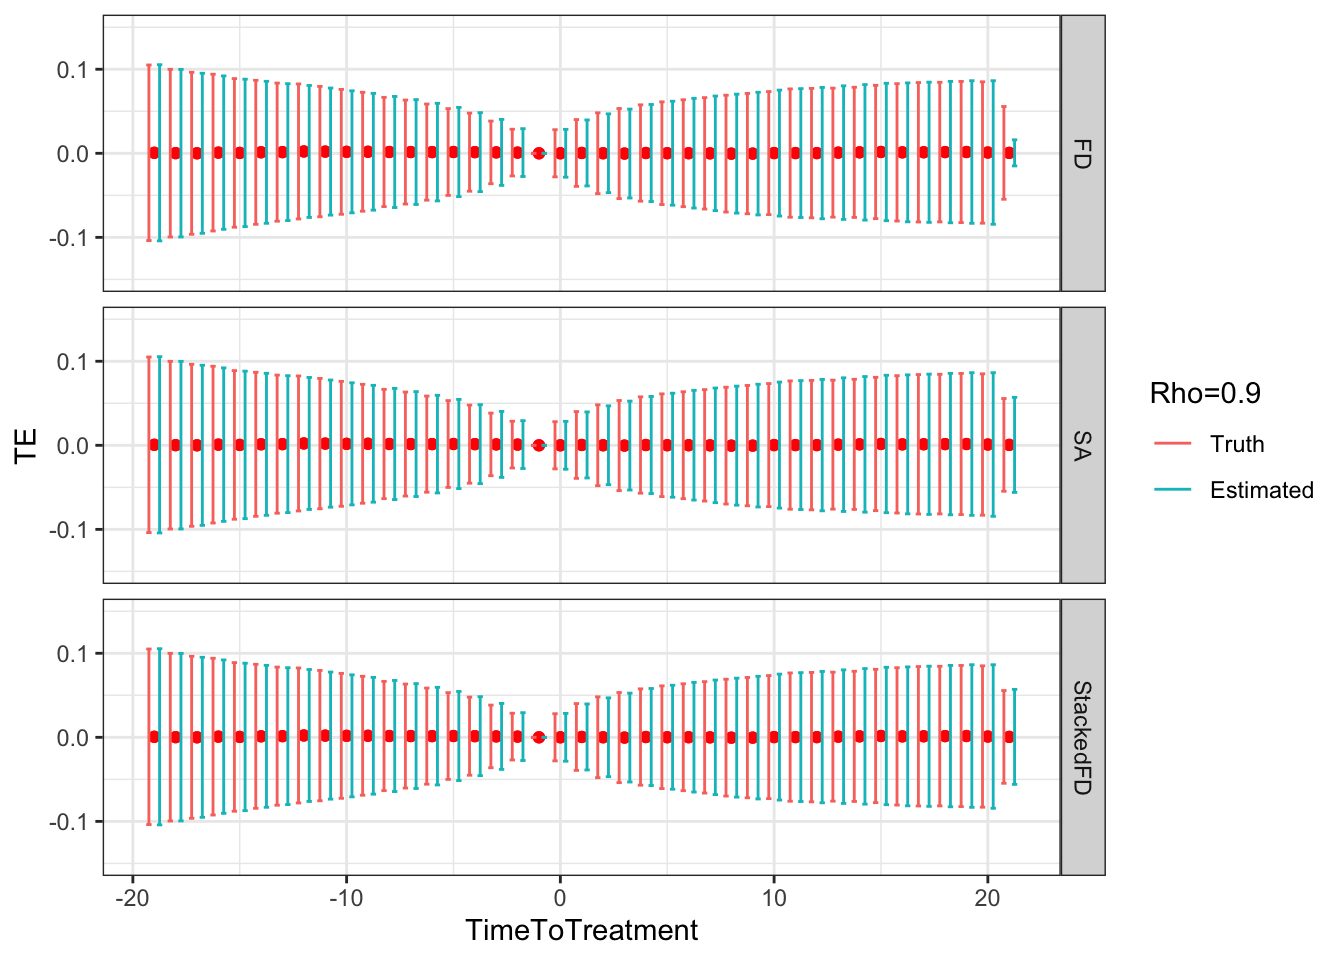 Clustered DID estimates of sampling noise with increasing temporal autocorrelation in outcomes